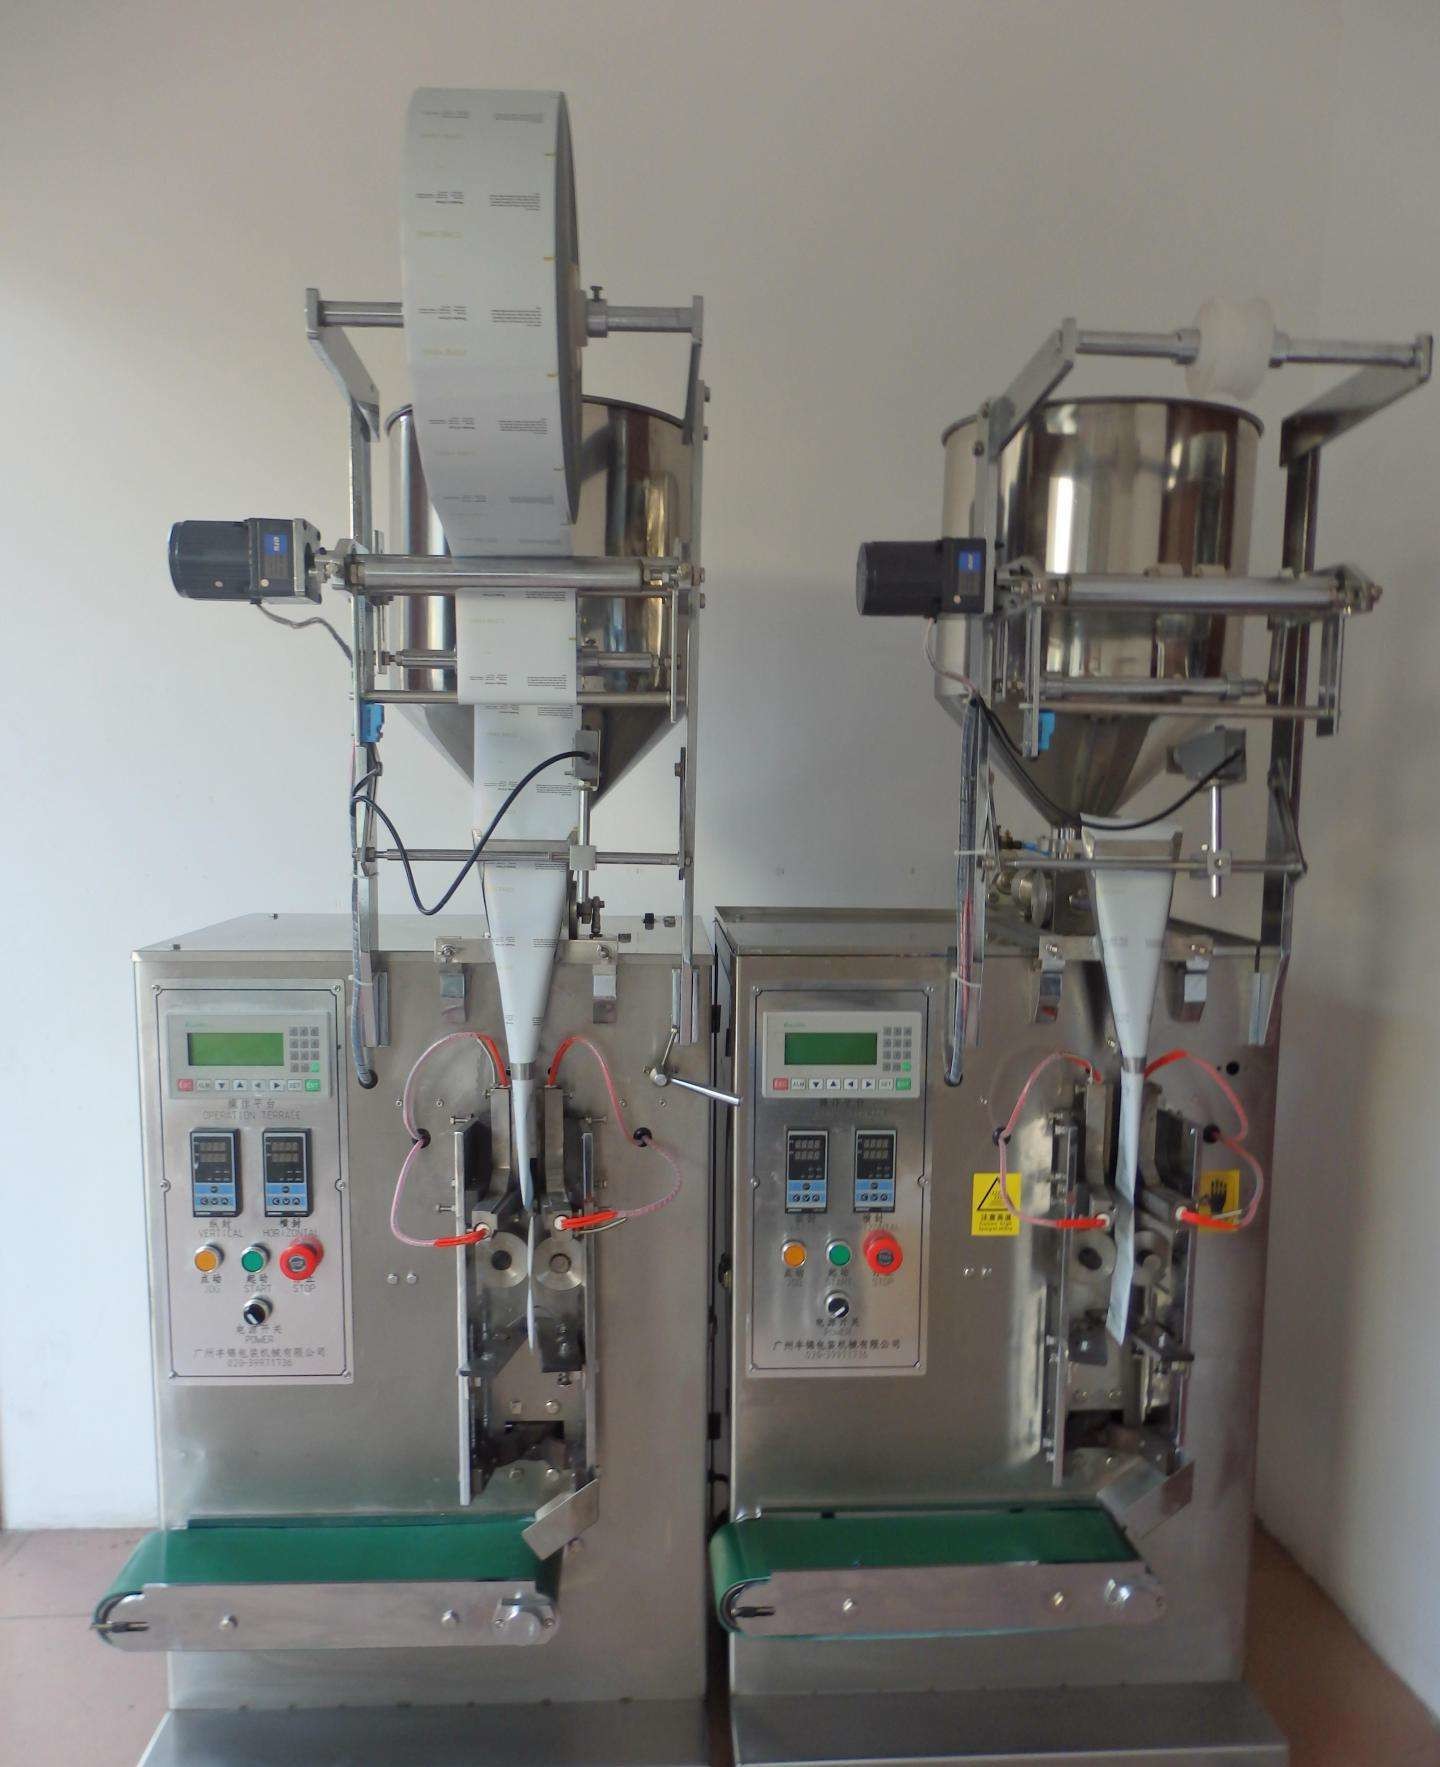 suppliers of bottling capping labelling packaging equipment uk 